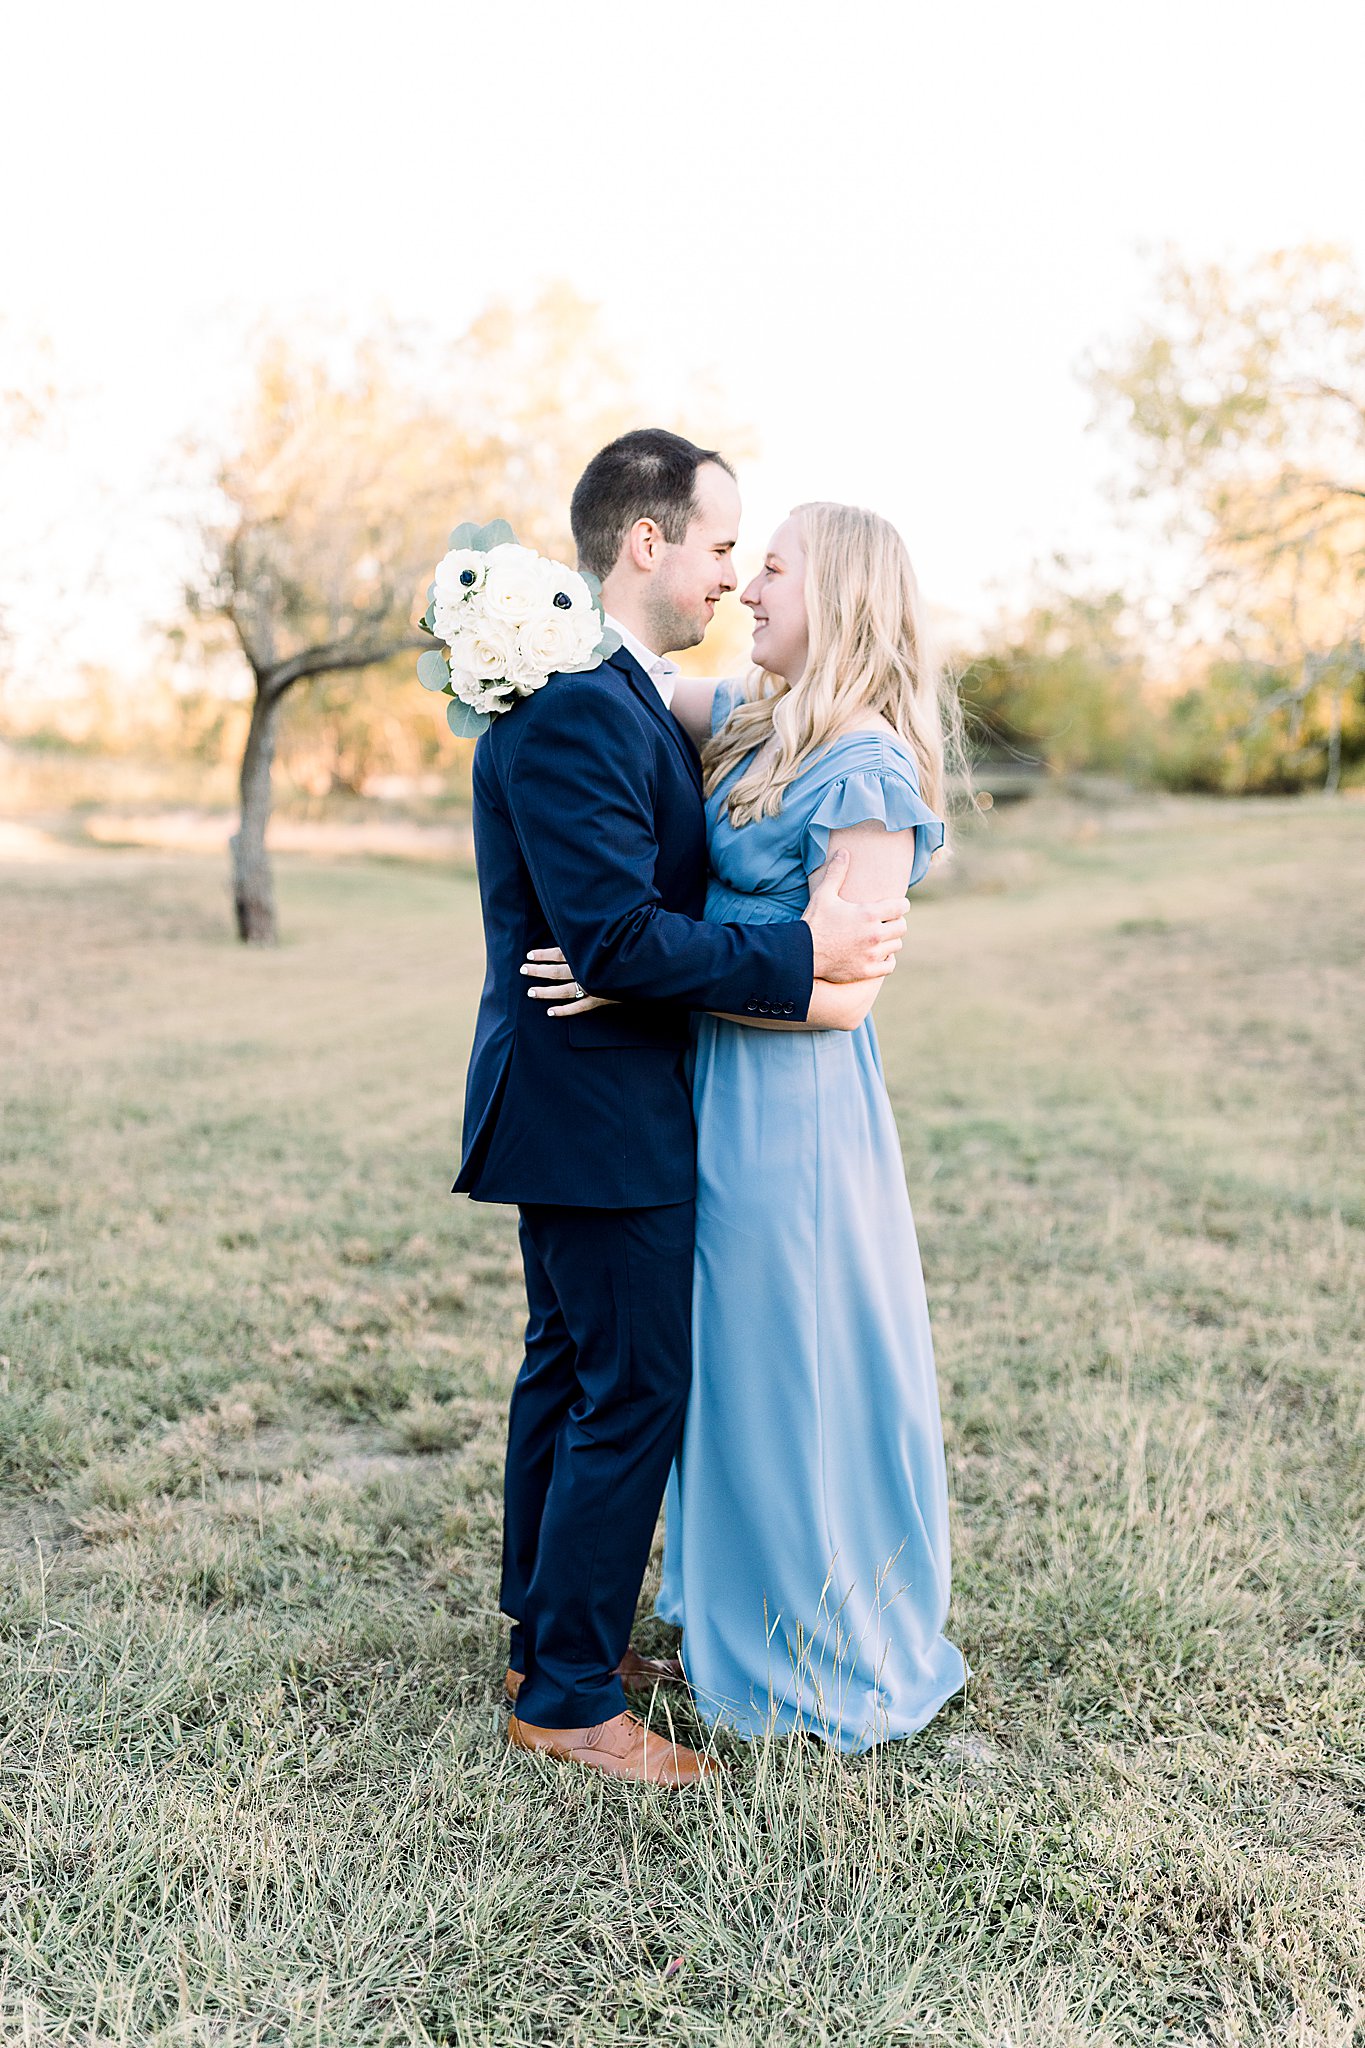 Fall Engagement Session, Casual Outfits, Anna Kay Photography, New Braunfels Wedding Photographer